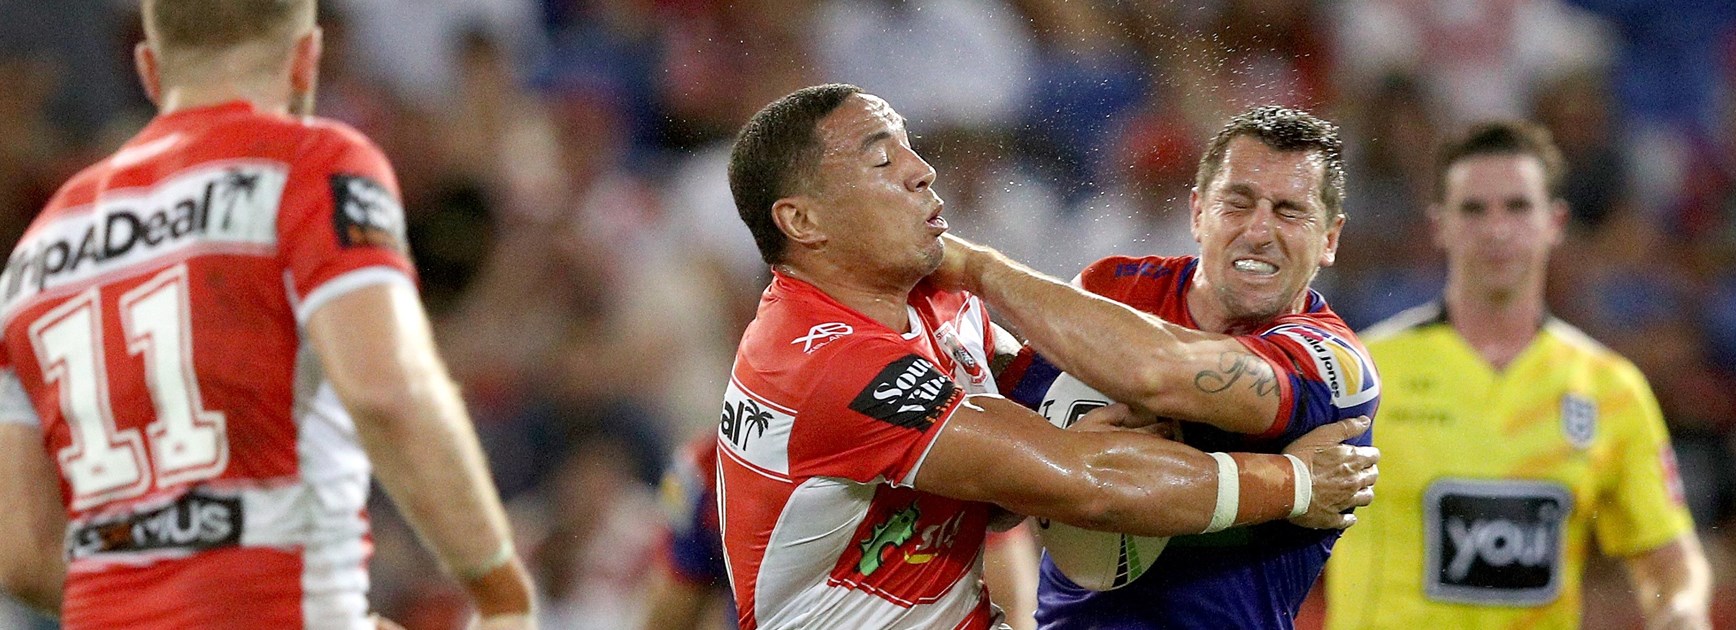 'He'd be awesome': Pearce makes his pitch for Frizell